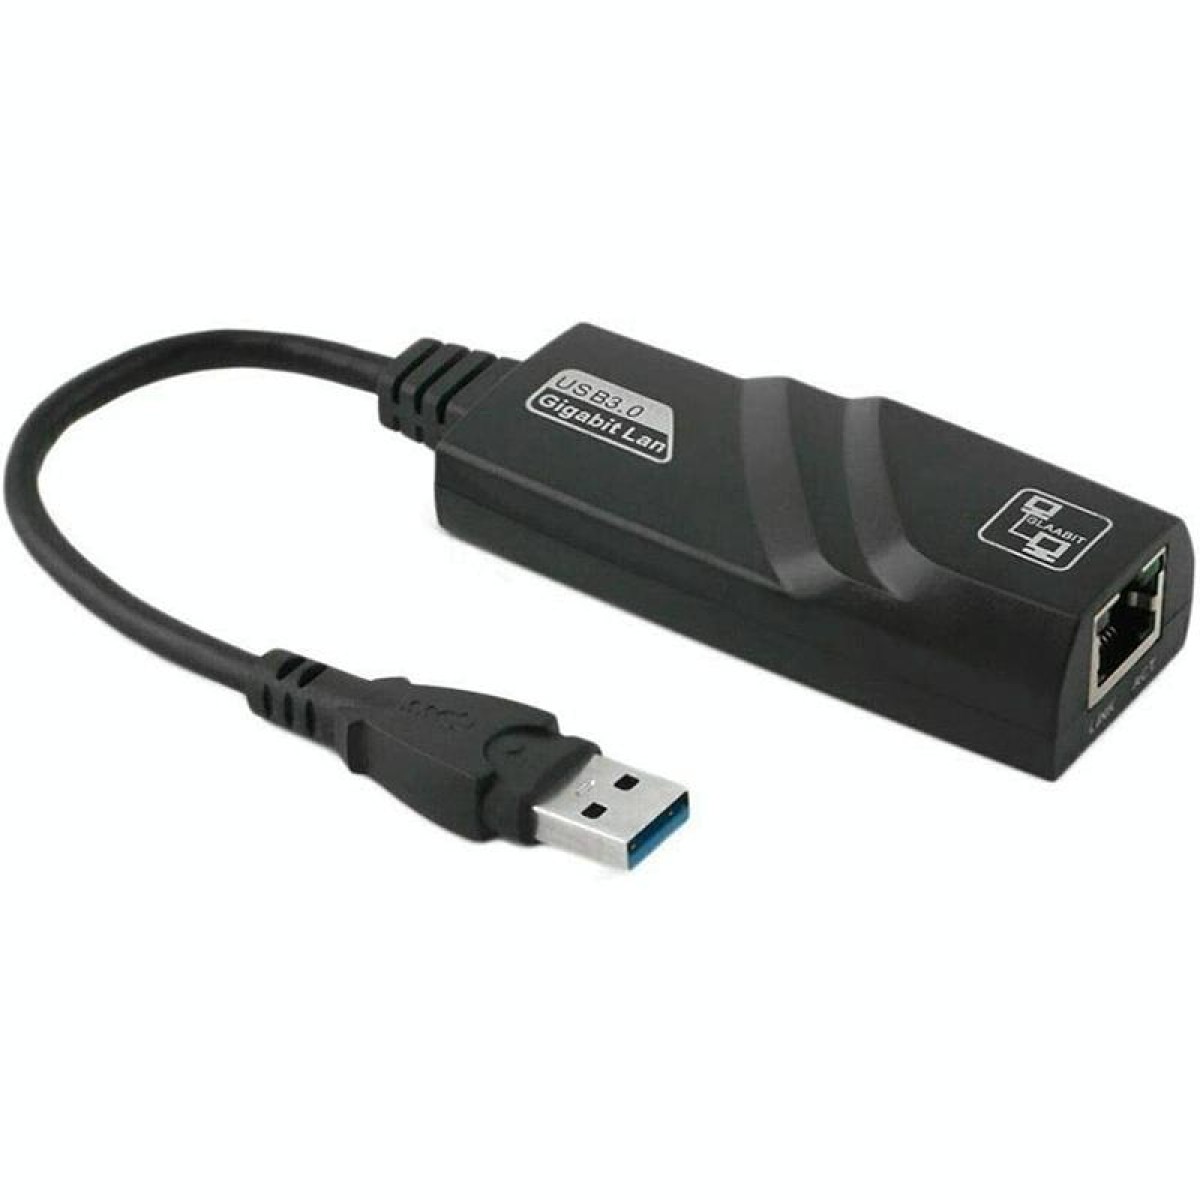 USB 3.0 10 / 100 / 1000Mbps Ethernet Adapter for Laptops, Plug and play(Black)